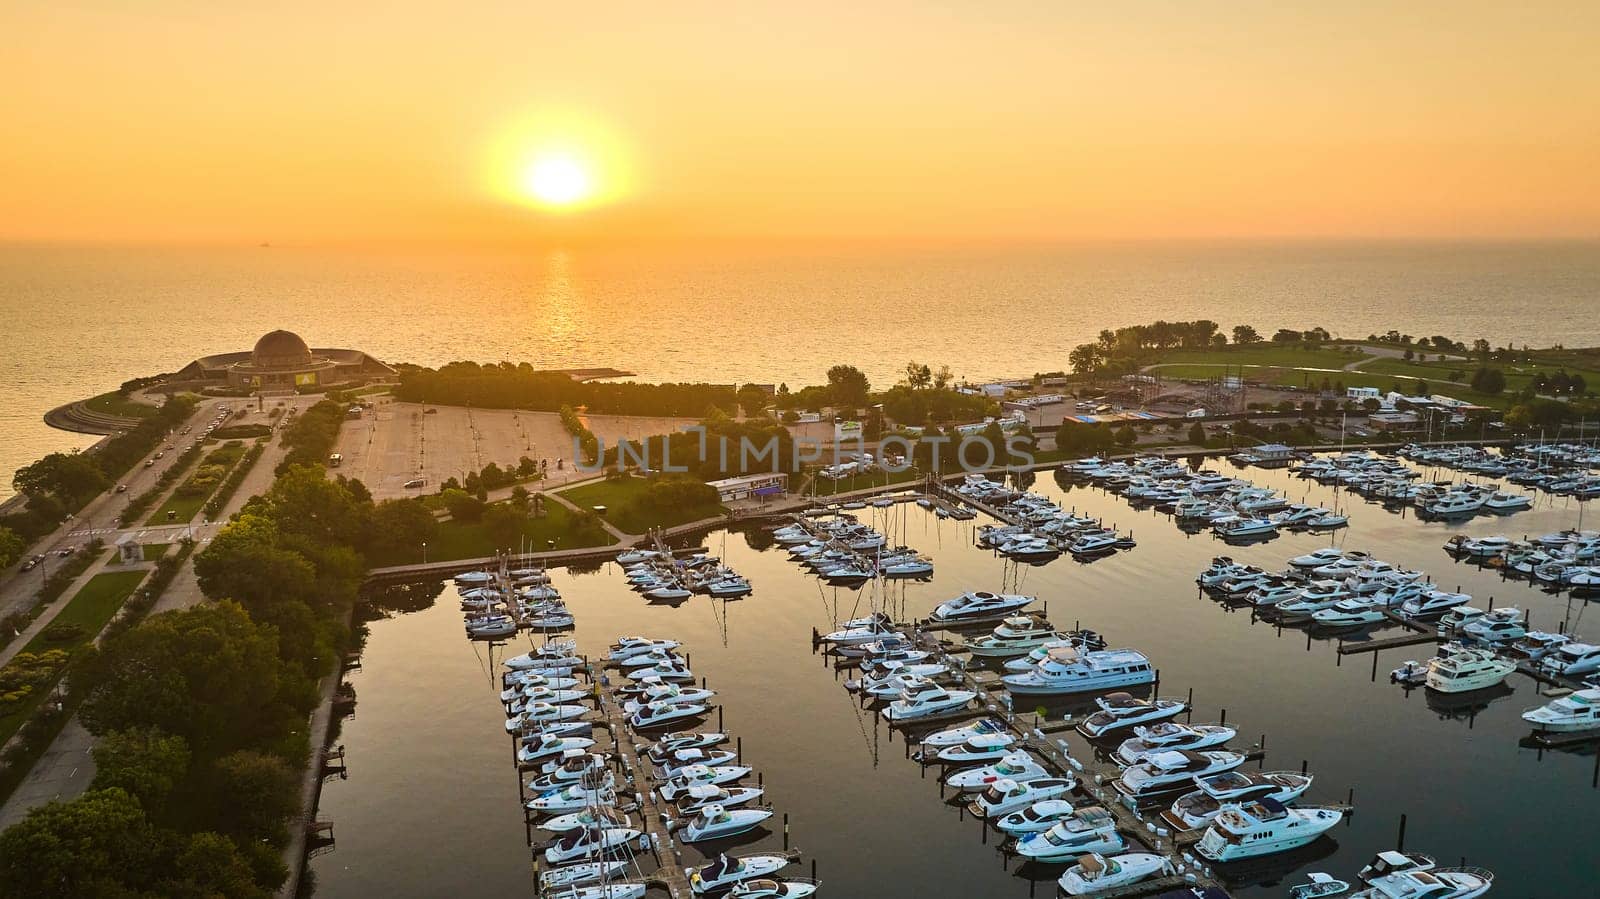 Boats on piers in Burnham Harbor with golden sun rising aerial Lake Michigan, Chicago, IL by njproductions